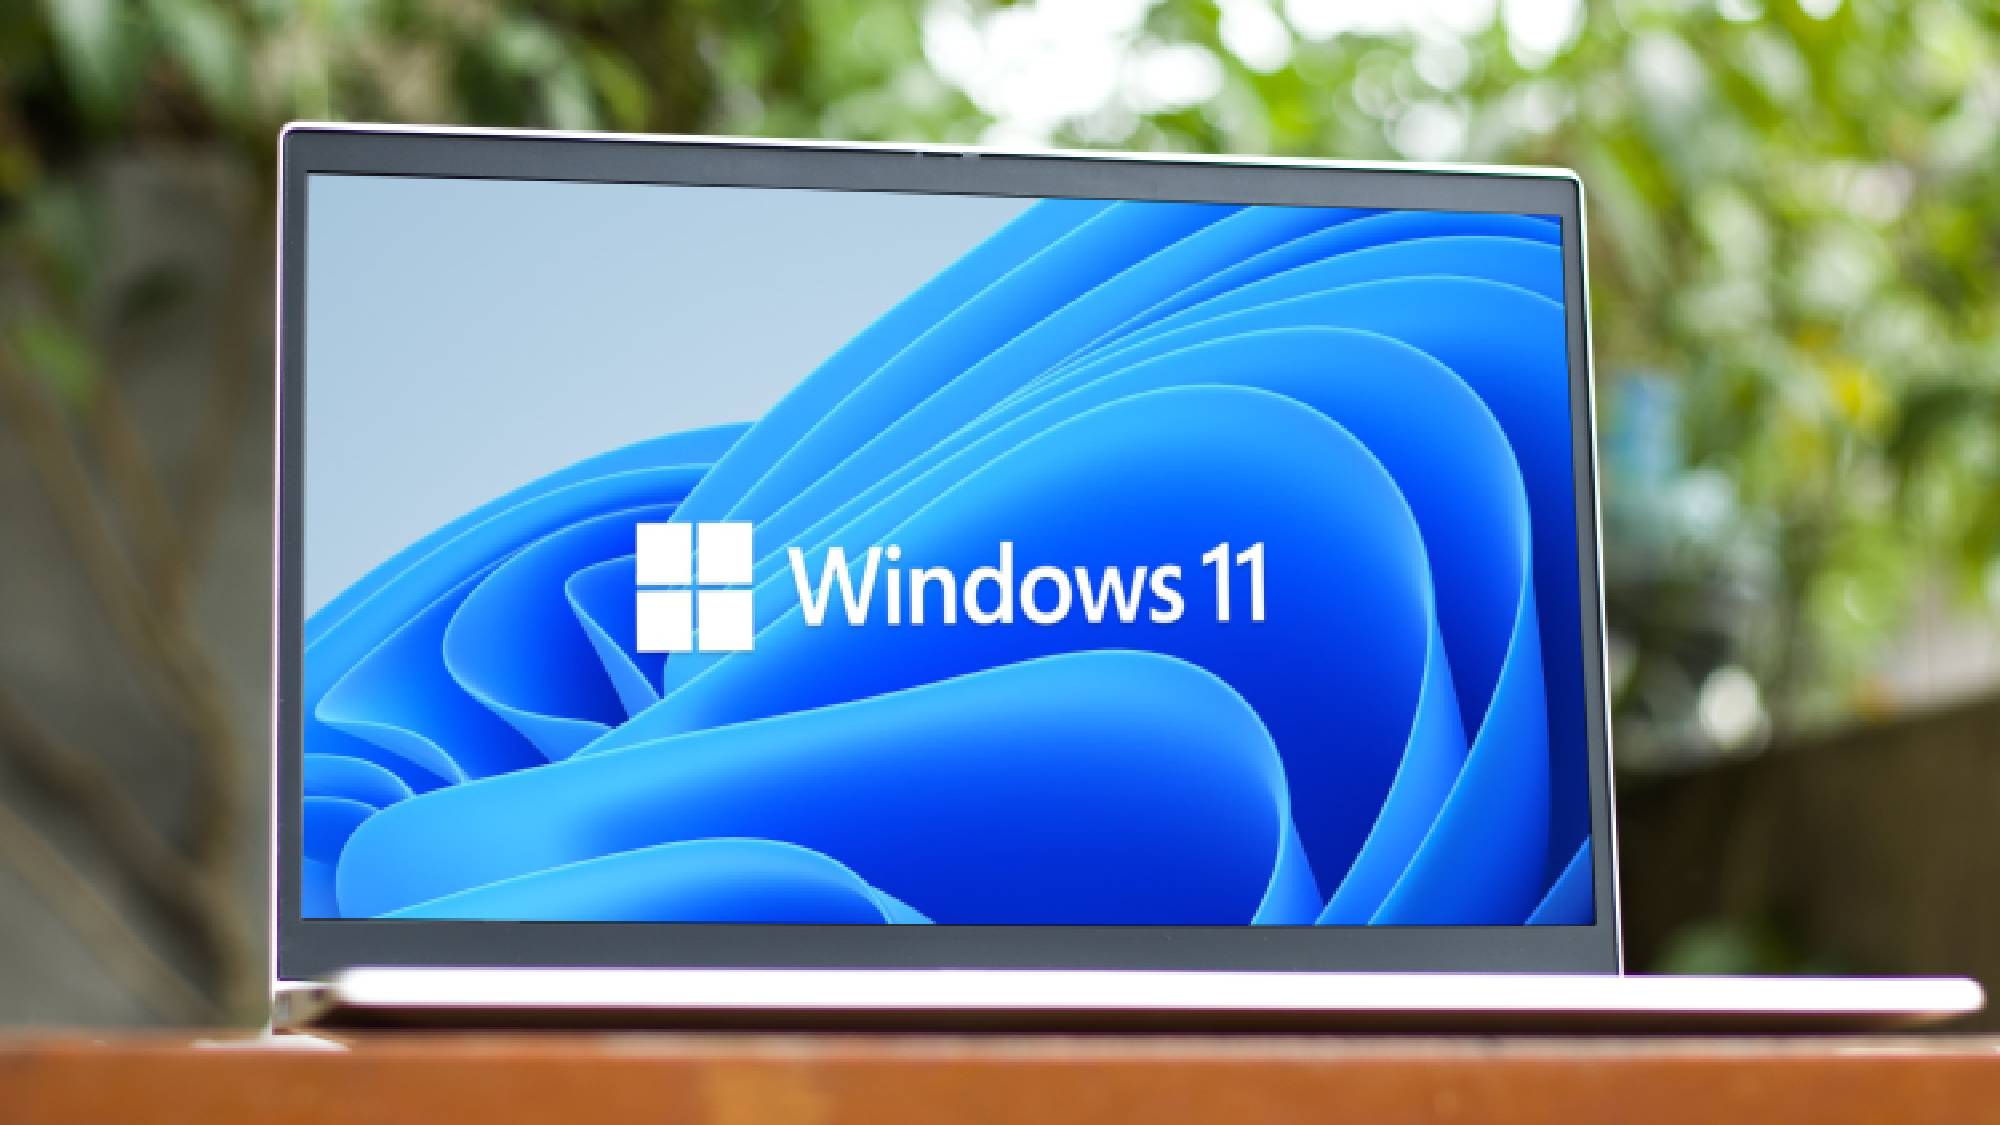 Alert: Fake Windows 11 download page installs malware on your PC